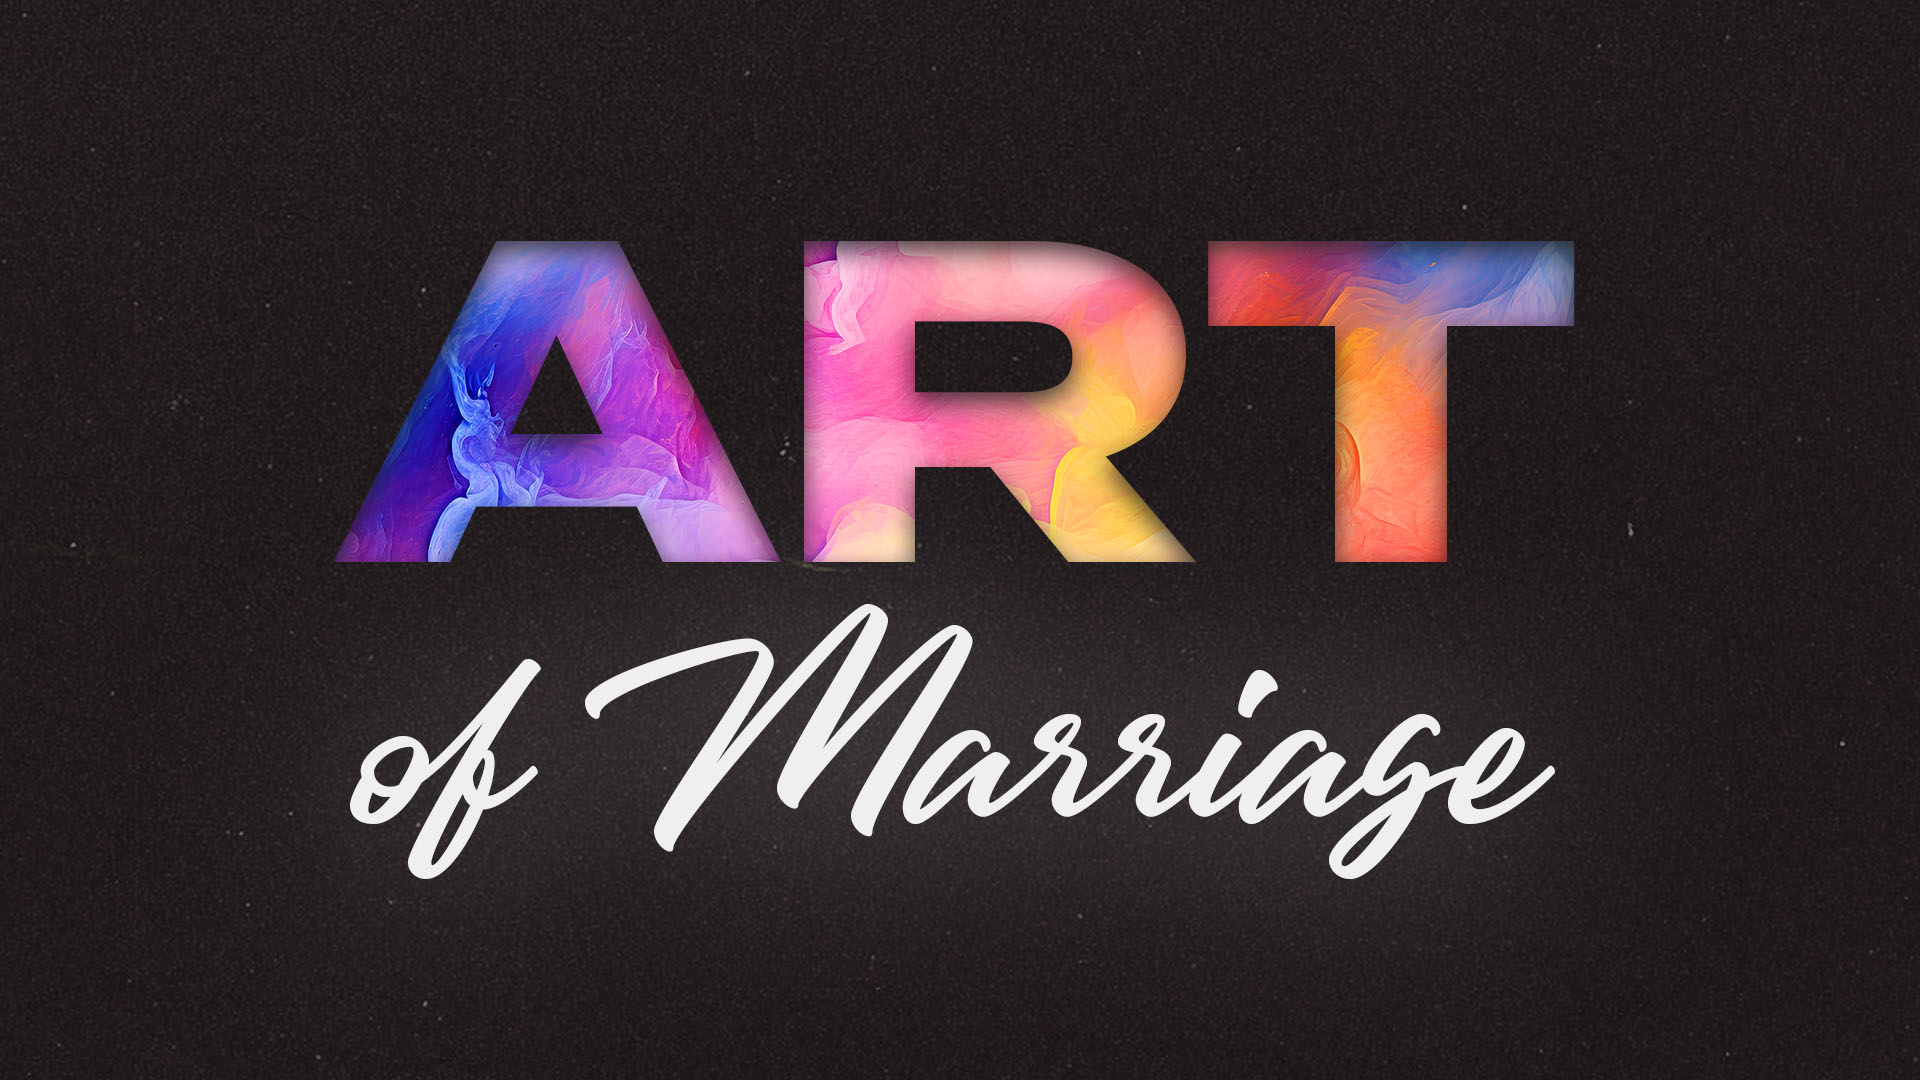 The Art Of Marriage

6-Week Series 
Meeting at Grace Church
Monday | 6:30 to 8:30pm
September 9 - October 14
